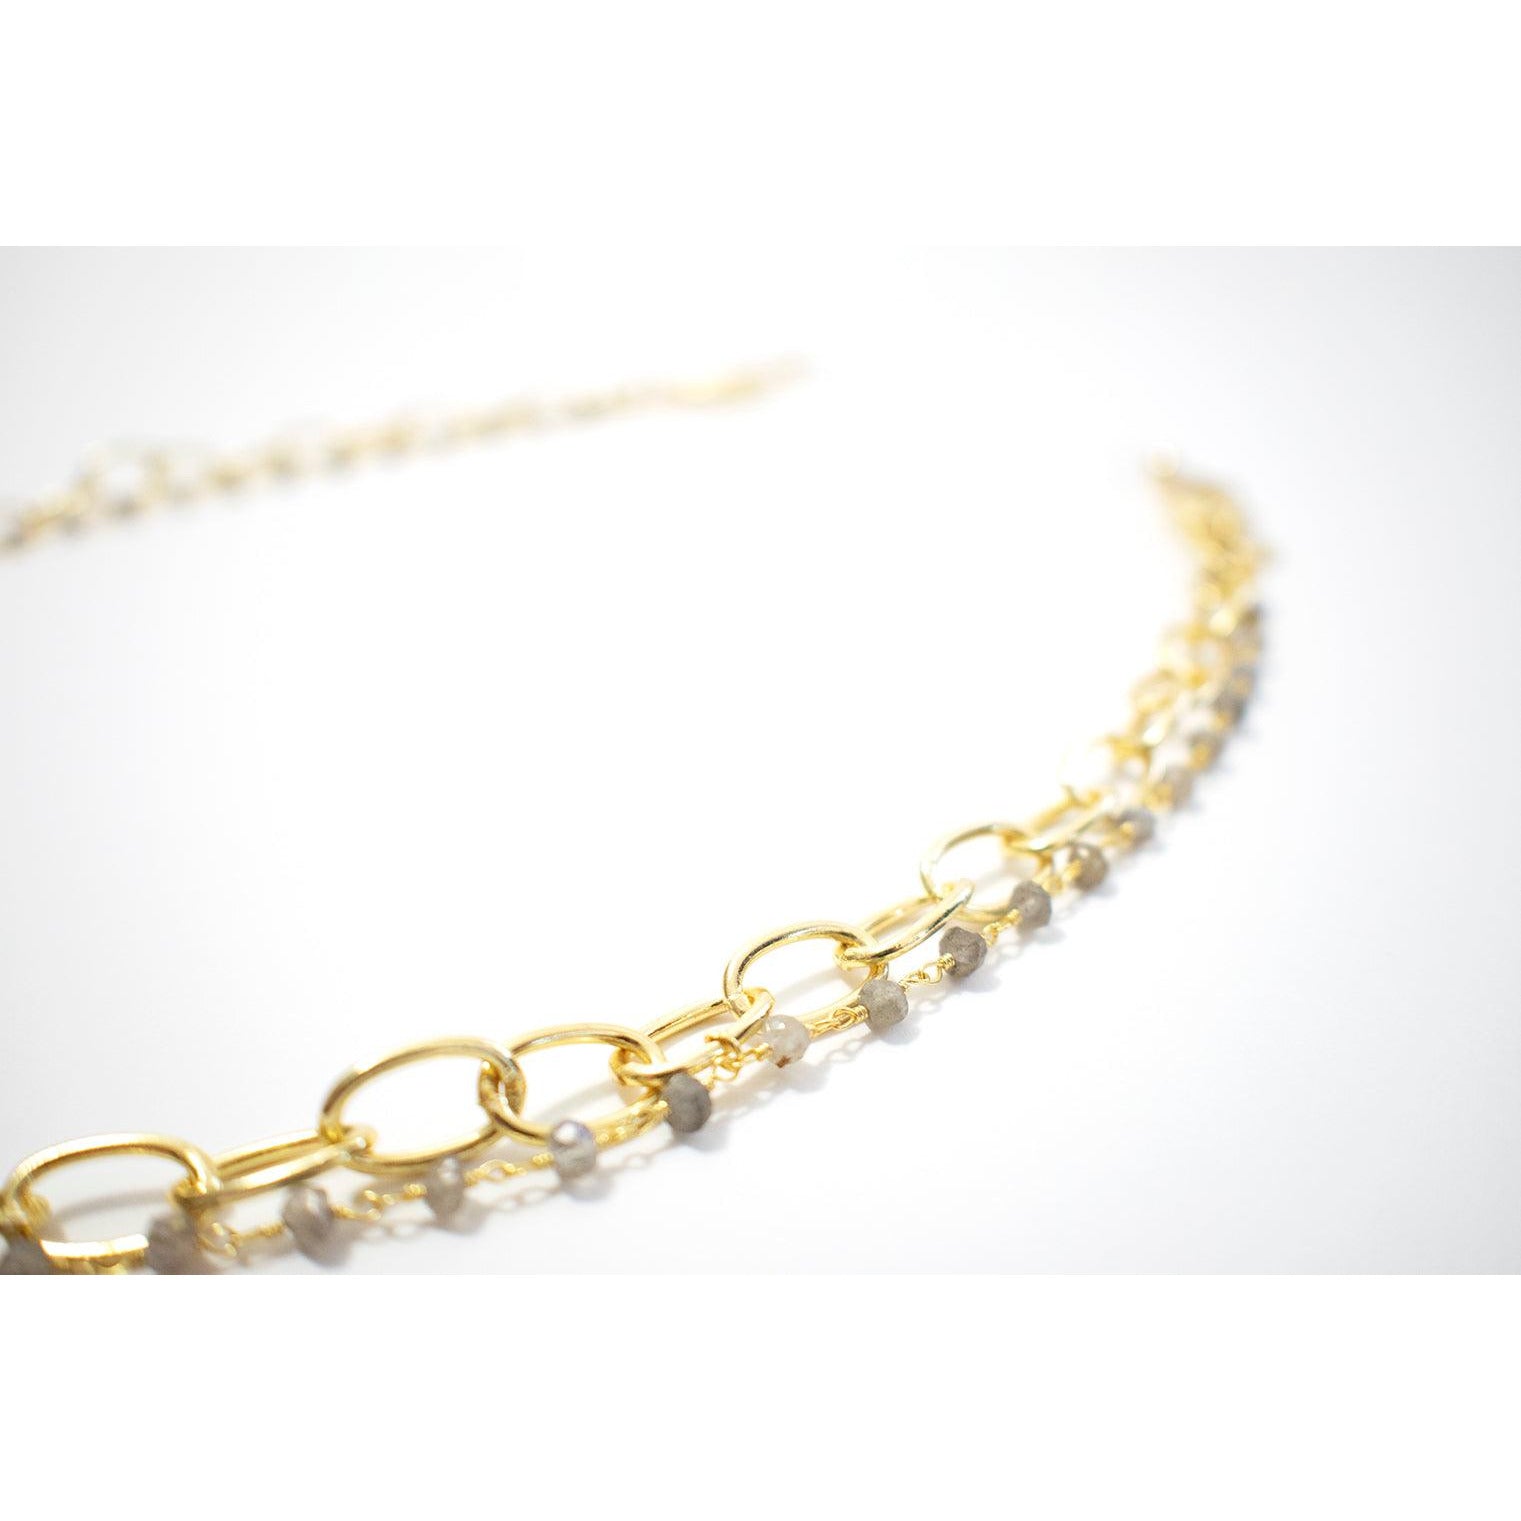 Layered Gold Chain with Natural Gems from Vint & York